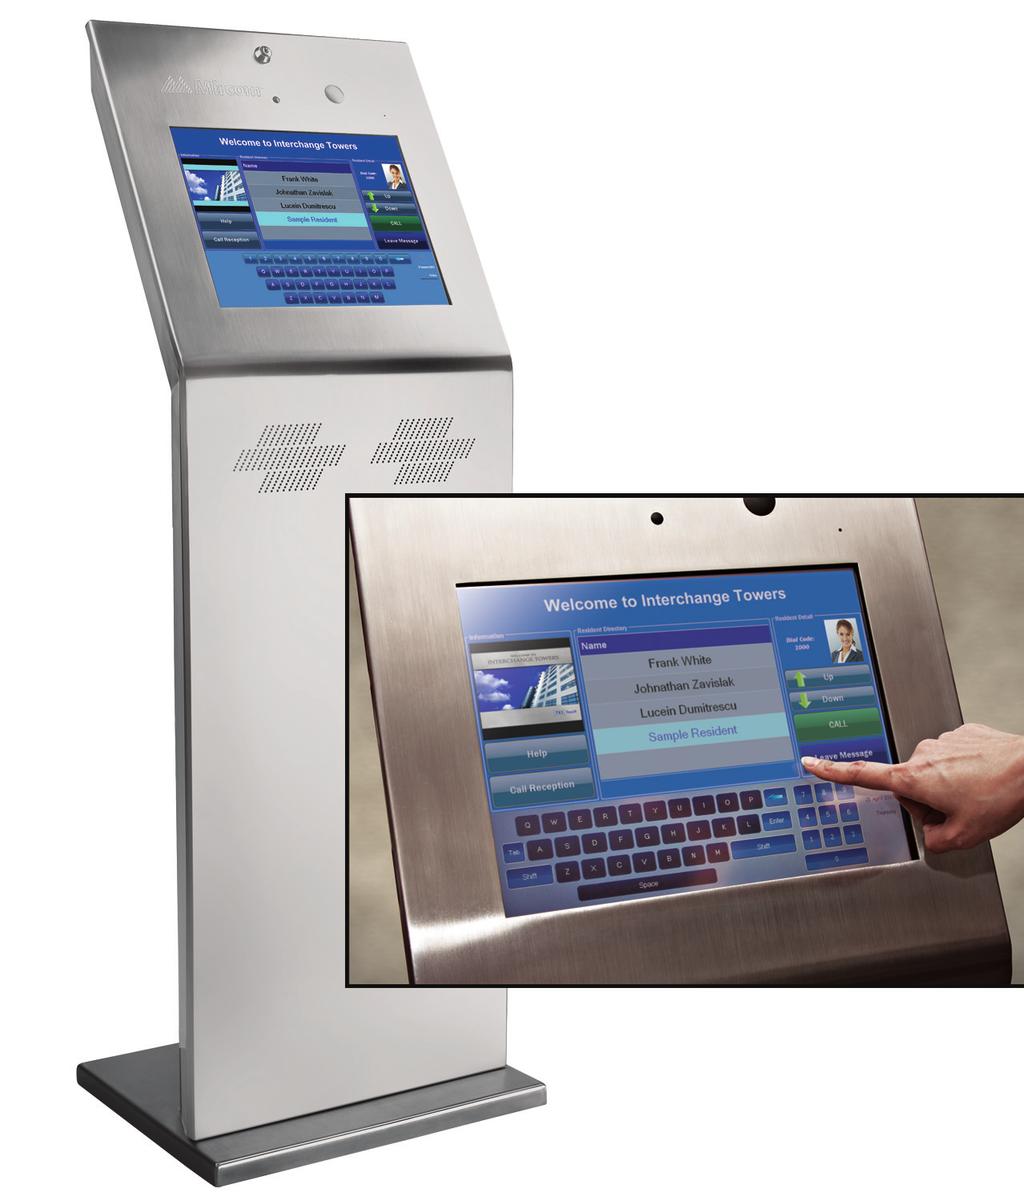 The panels are available in all forms of mounting including flush, surface, gooseneck and a stand-alone kiosk style.